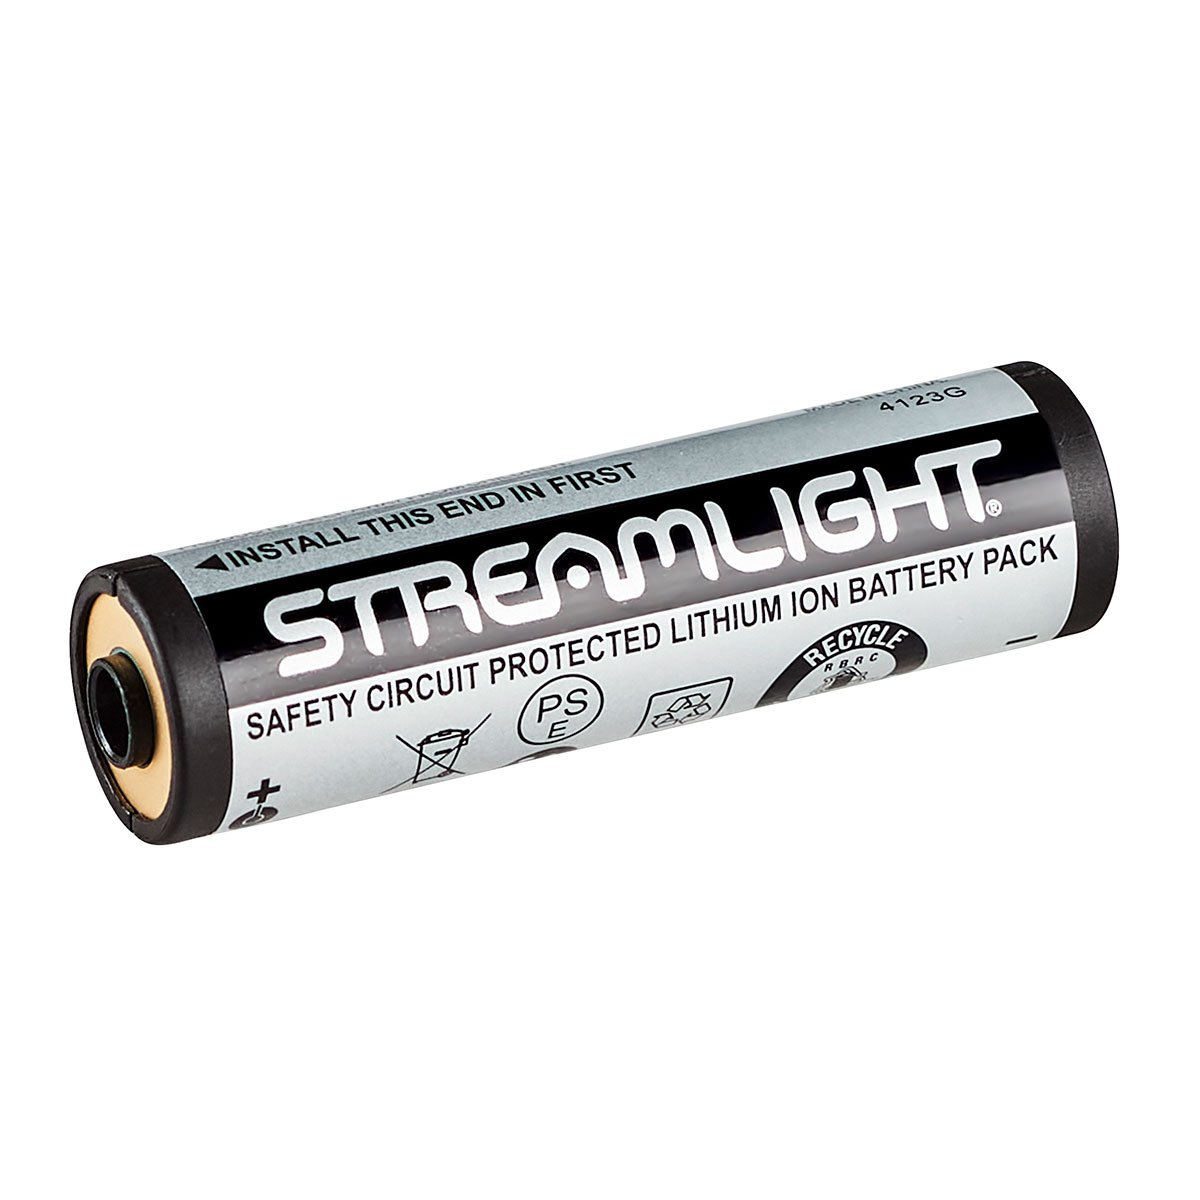 STREAMLIGHT - STRION 2020 RECHARGEABLE BATTERY